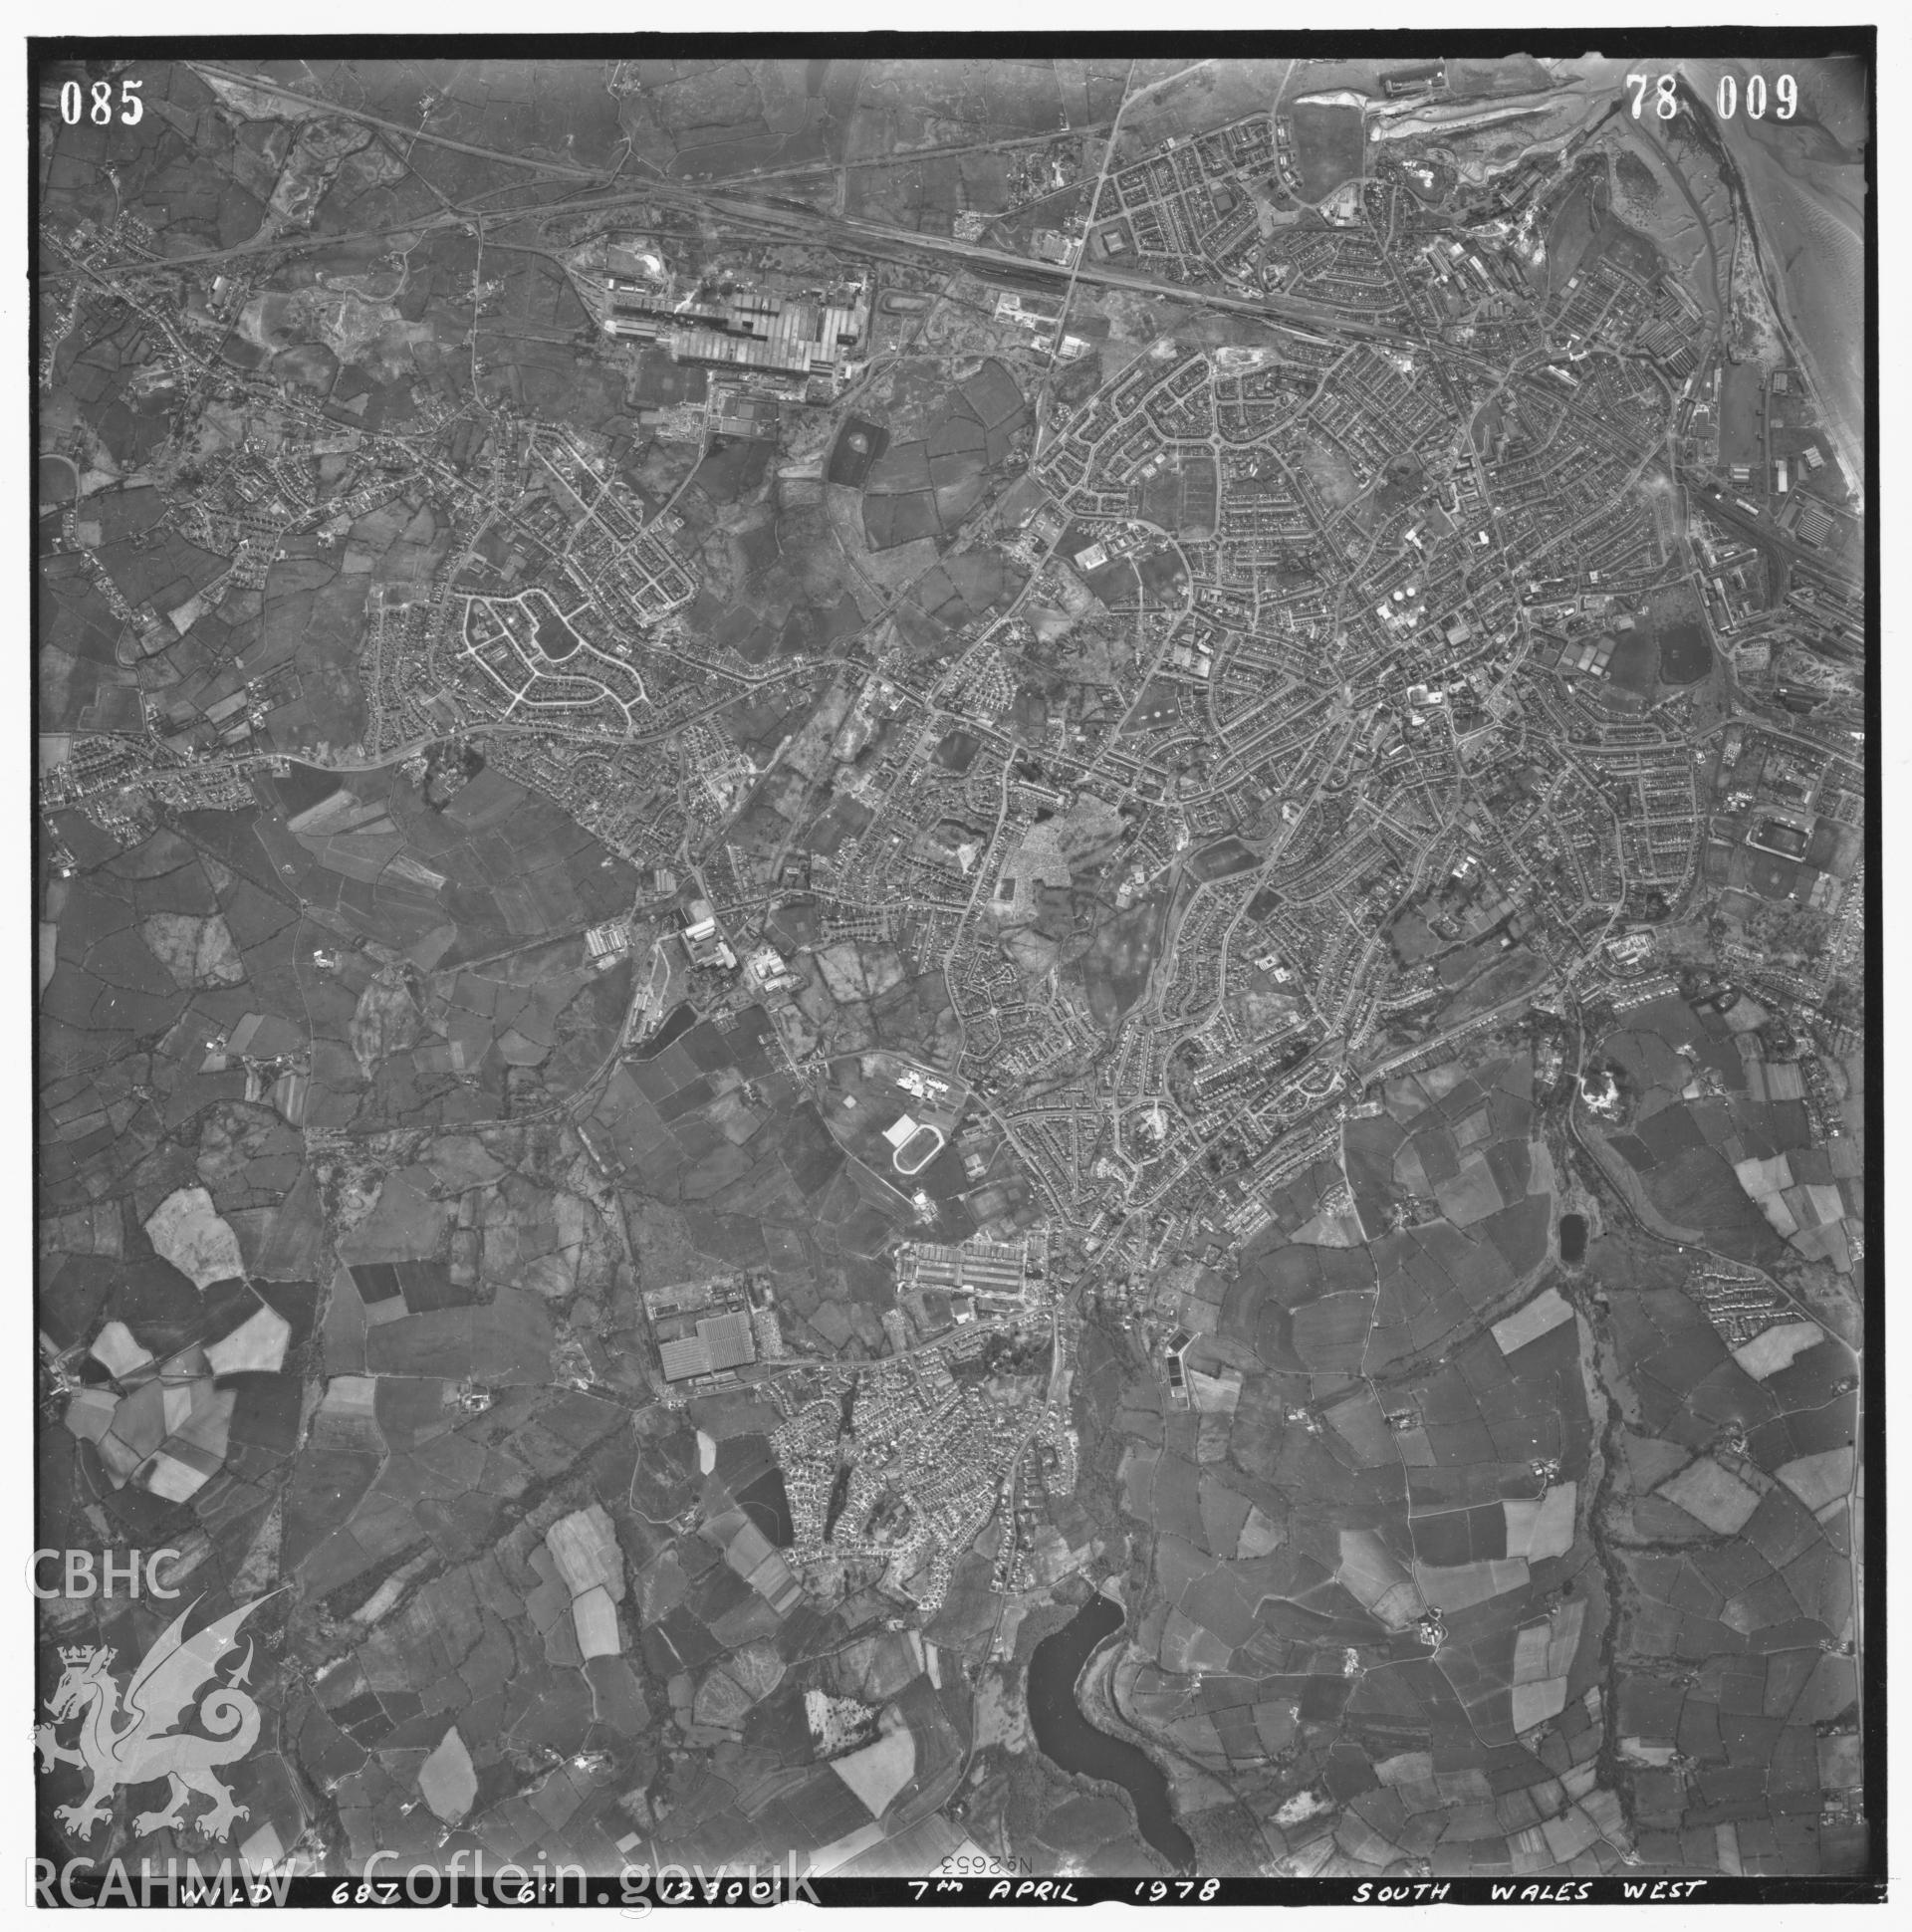 Digitized copy of an aerial photograph showing Llanelli area, taken by Ordnance Survey, 1978.